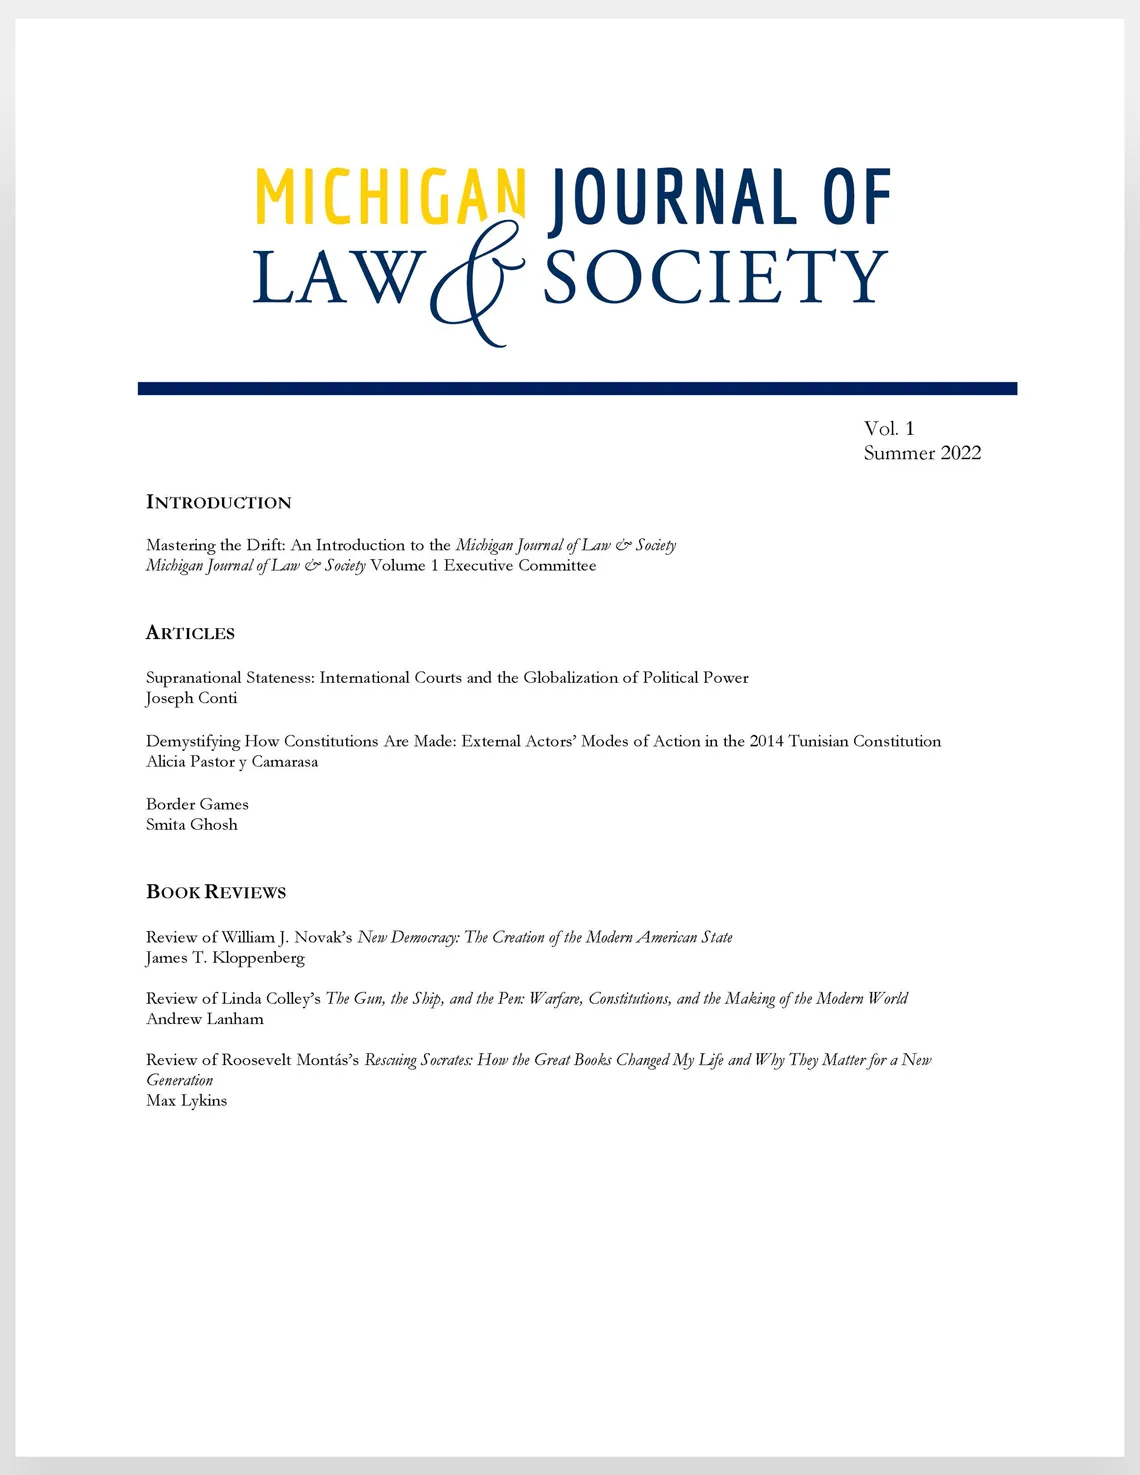 The theme of the inaugural issue of the journal centers on sovereignty, states, and inclusion